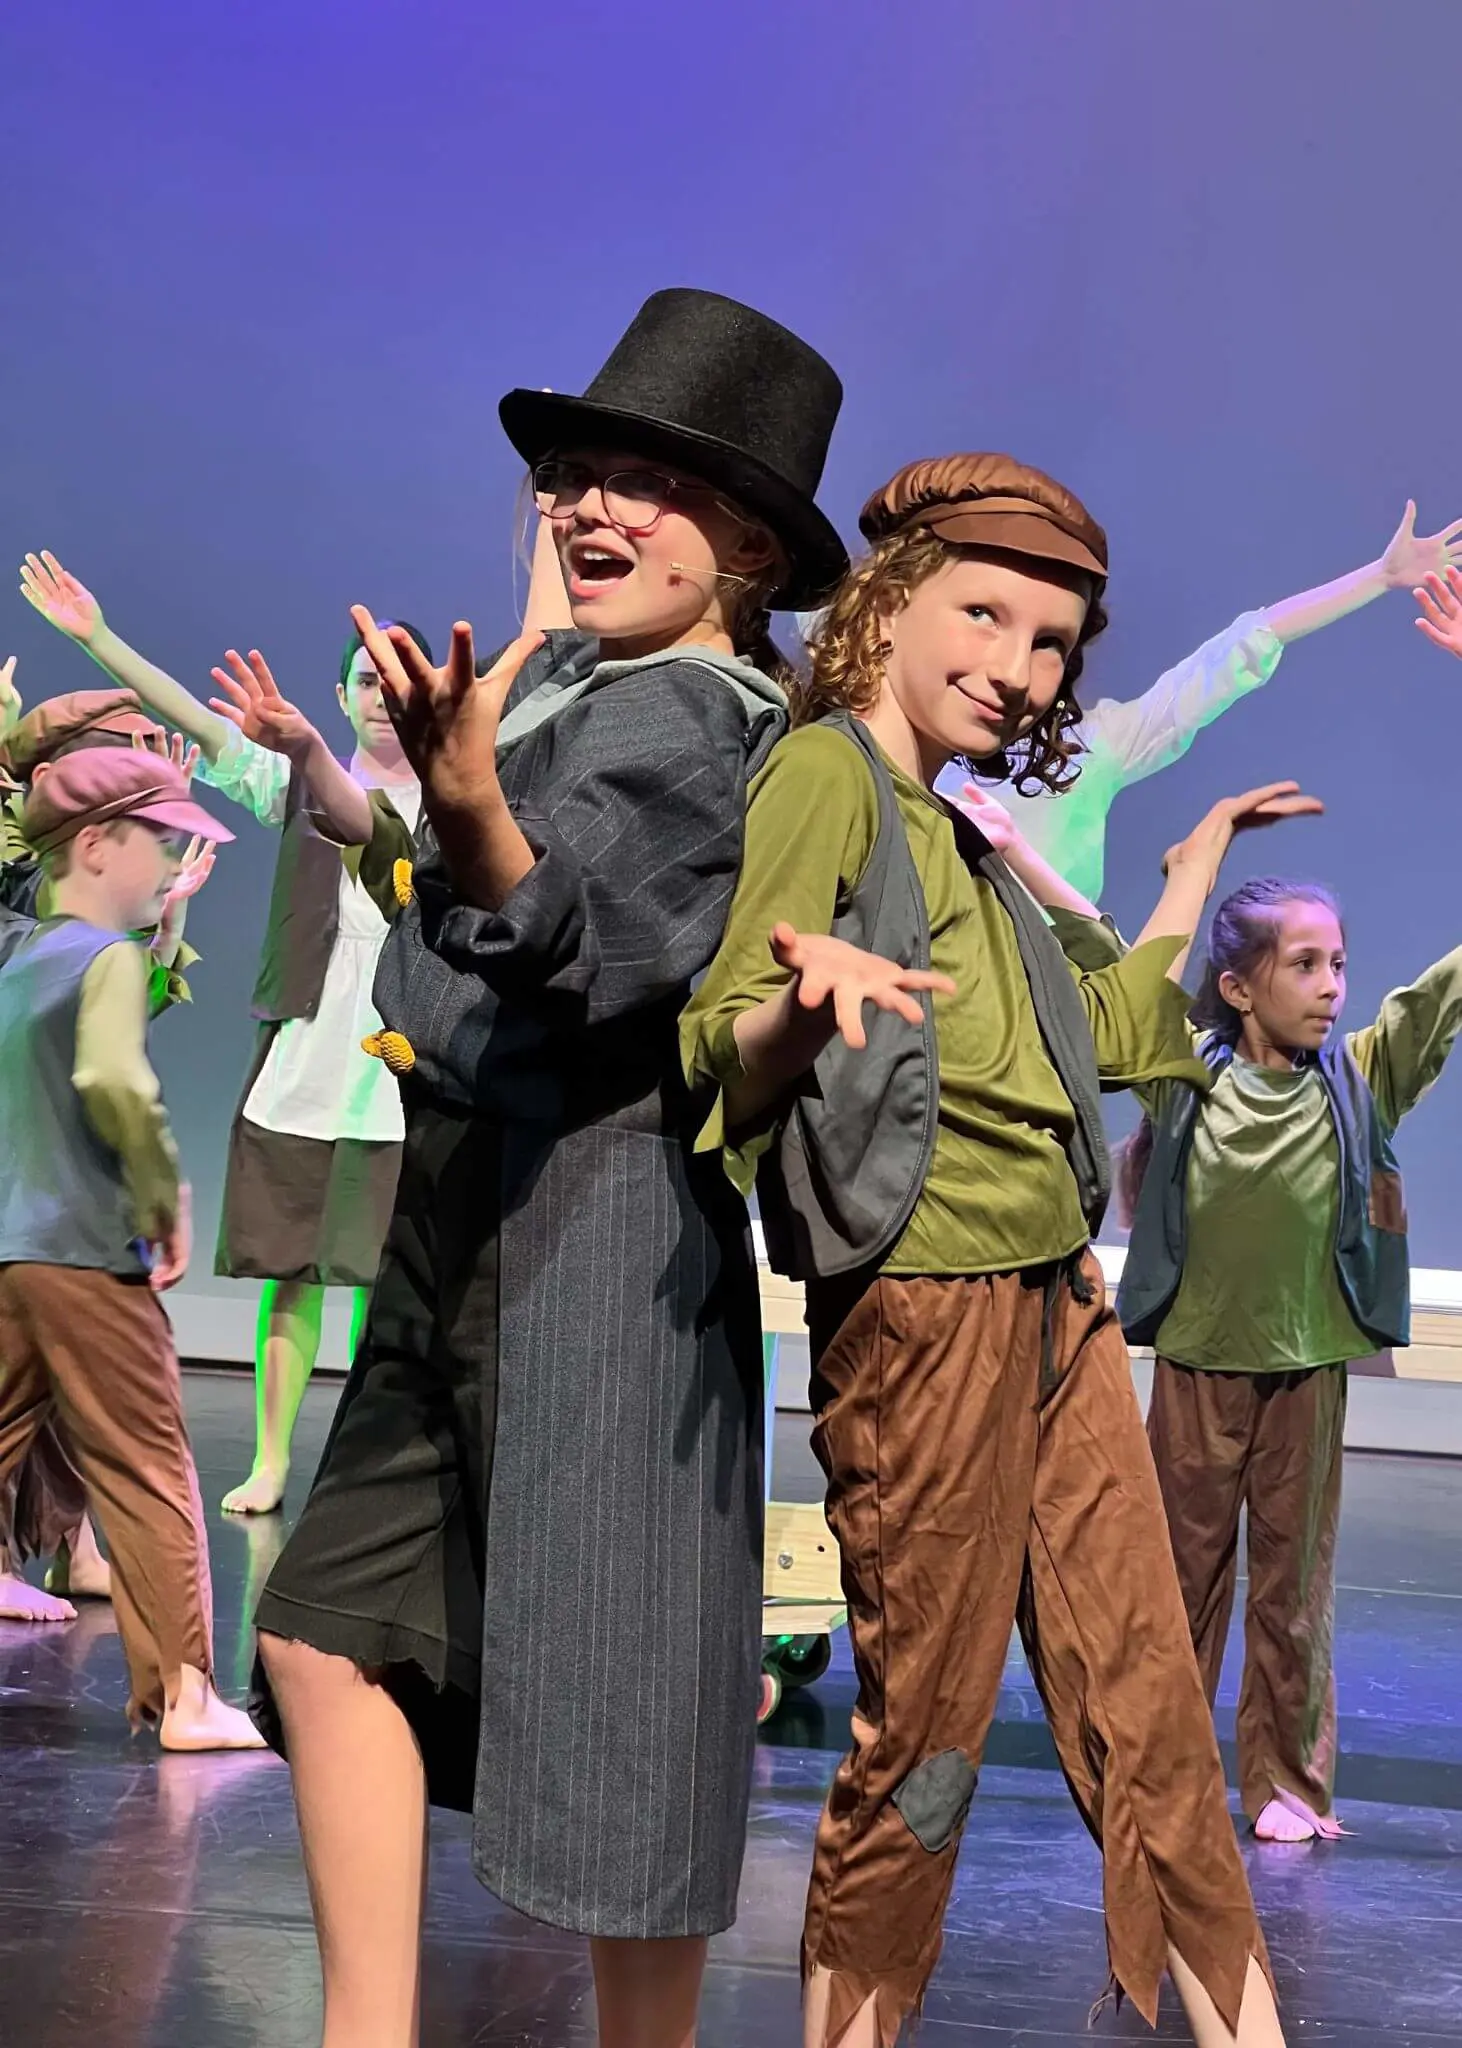 Prep pupils performing a play at Ibstock Place School, a private school near Richmond, Barnes, Putney, Kingston, and Wandsworth on an overseas trip. 